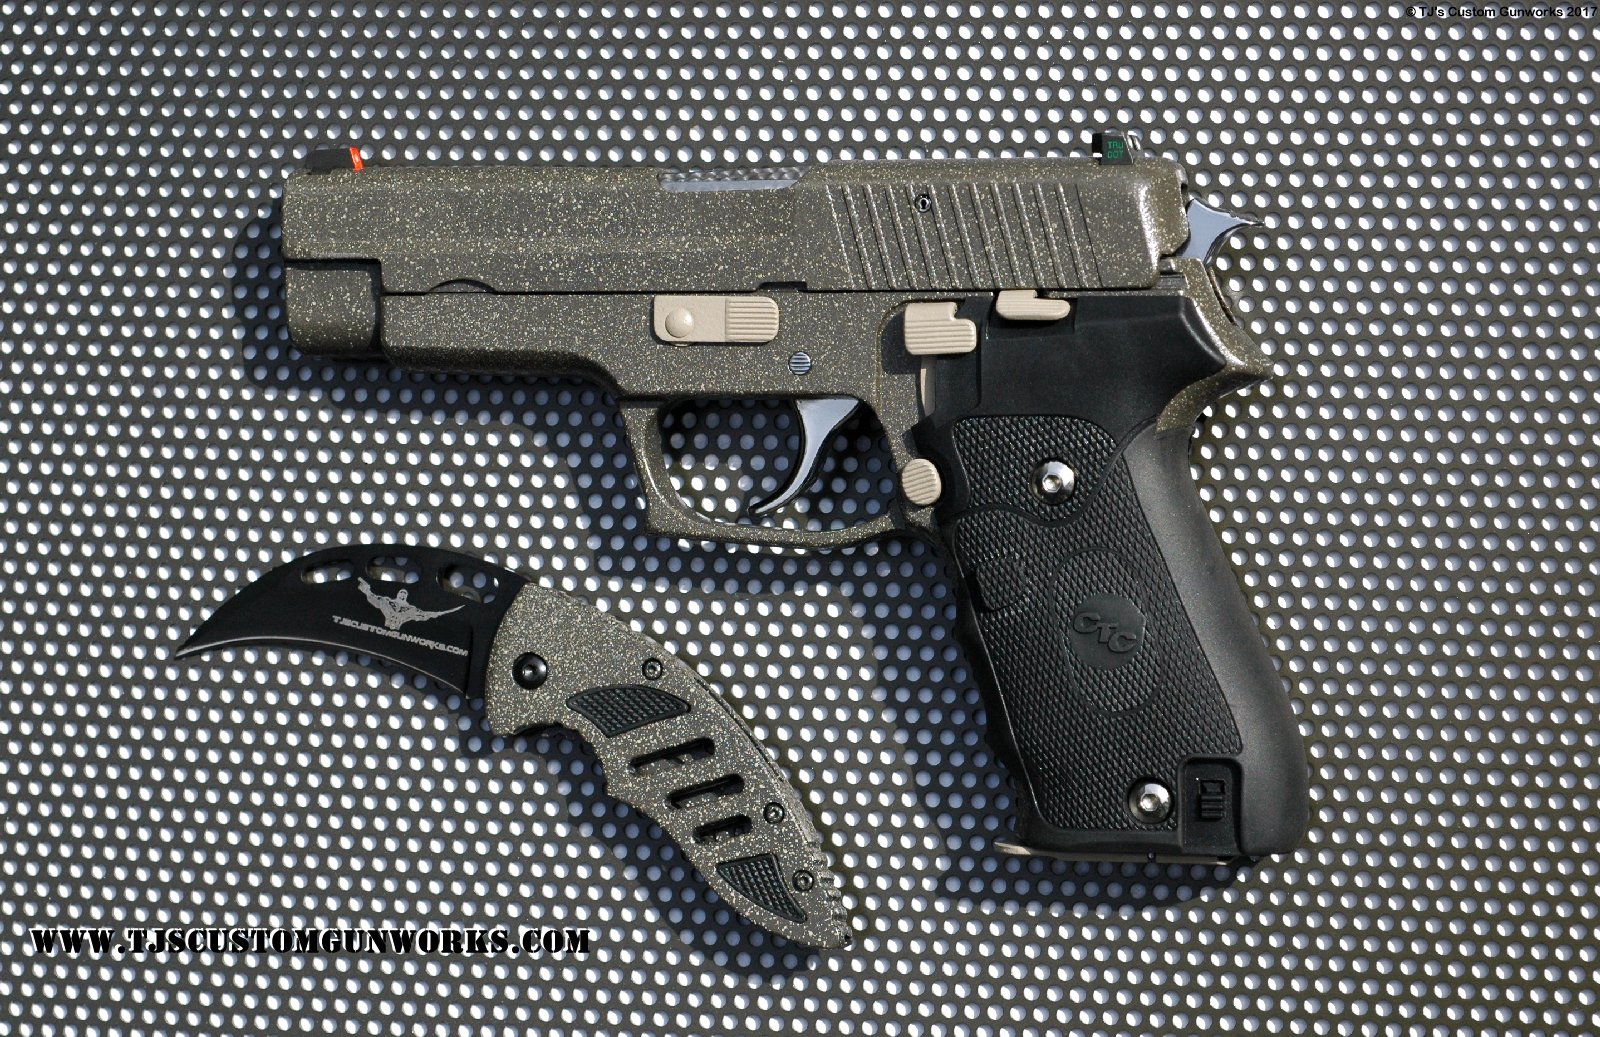 Custom Germany Sig Sauer P220 FDE Brown Speckled Duracoat